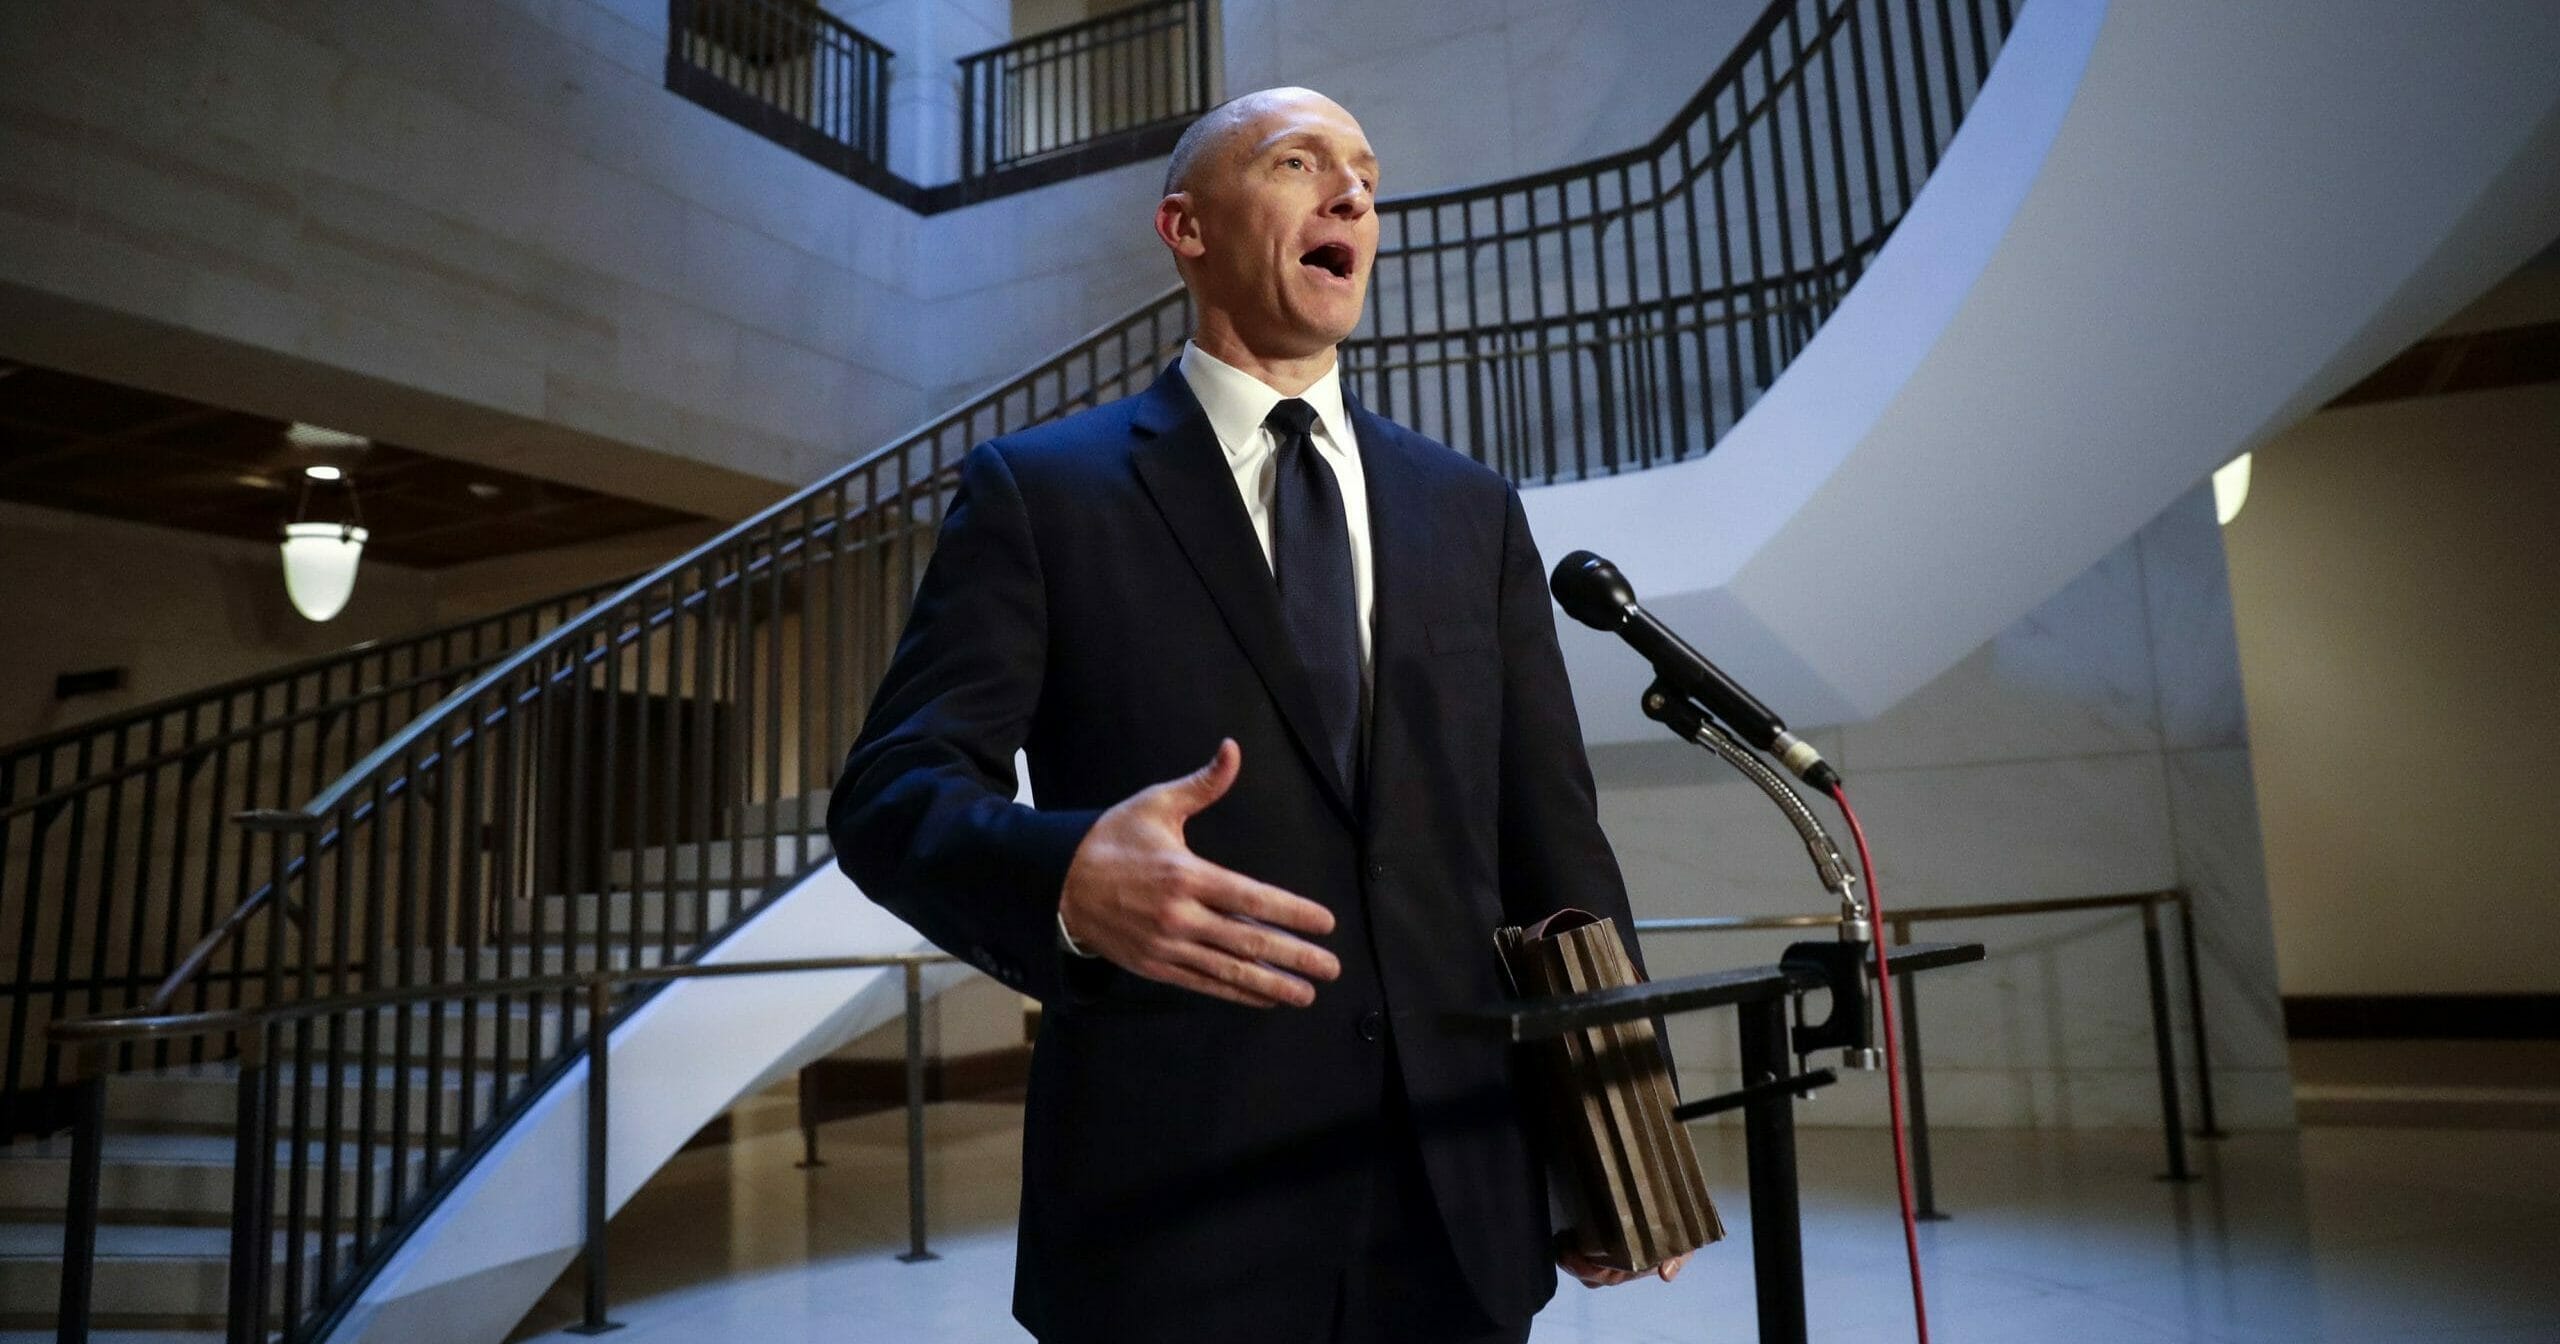 In a Nov. 2, 2017, file photo, Carter Page, a foreign policy adviser to Donald Trump's 2016 presidential campaign, speaks with reporters following a day of questions from the House Intelligence Committee, on Capitol Hill in Washington.